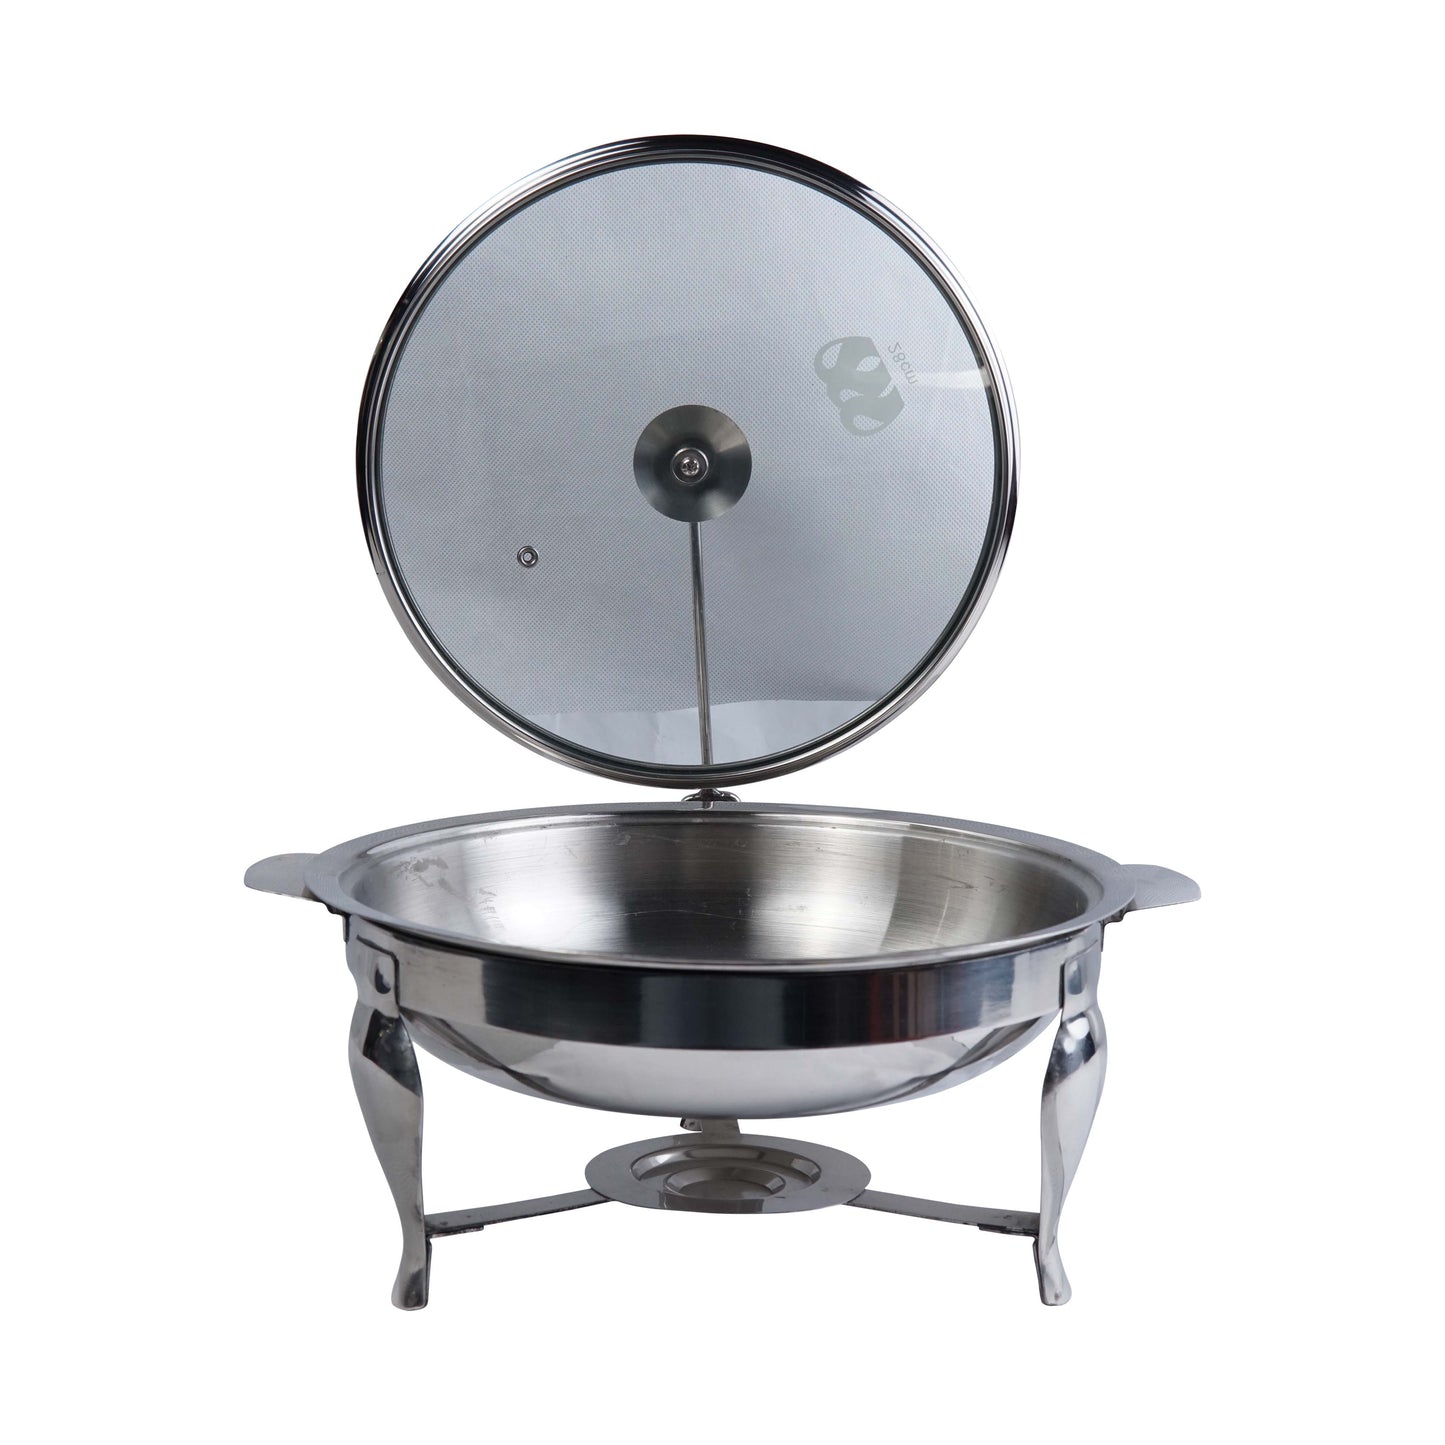 Stainless steel Chafing Dish, Food Warming Buffet Serving Pot Design 01 (28cm) with Tealight Candle